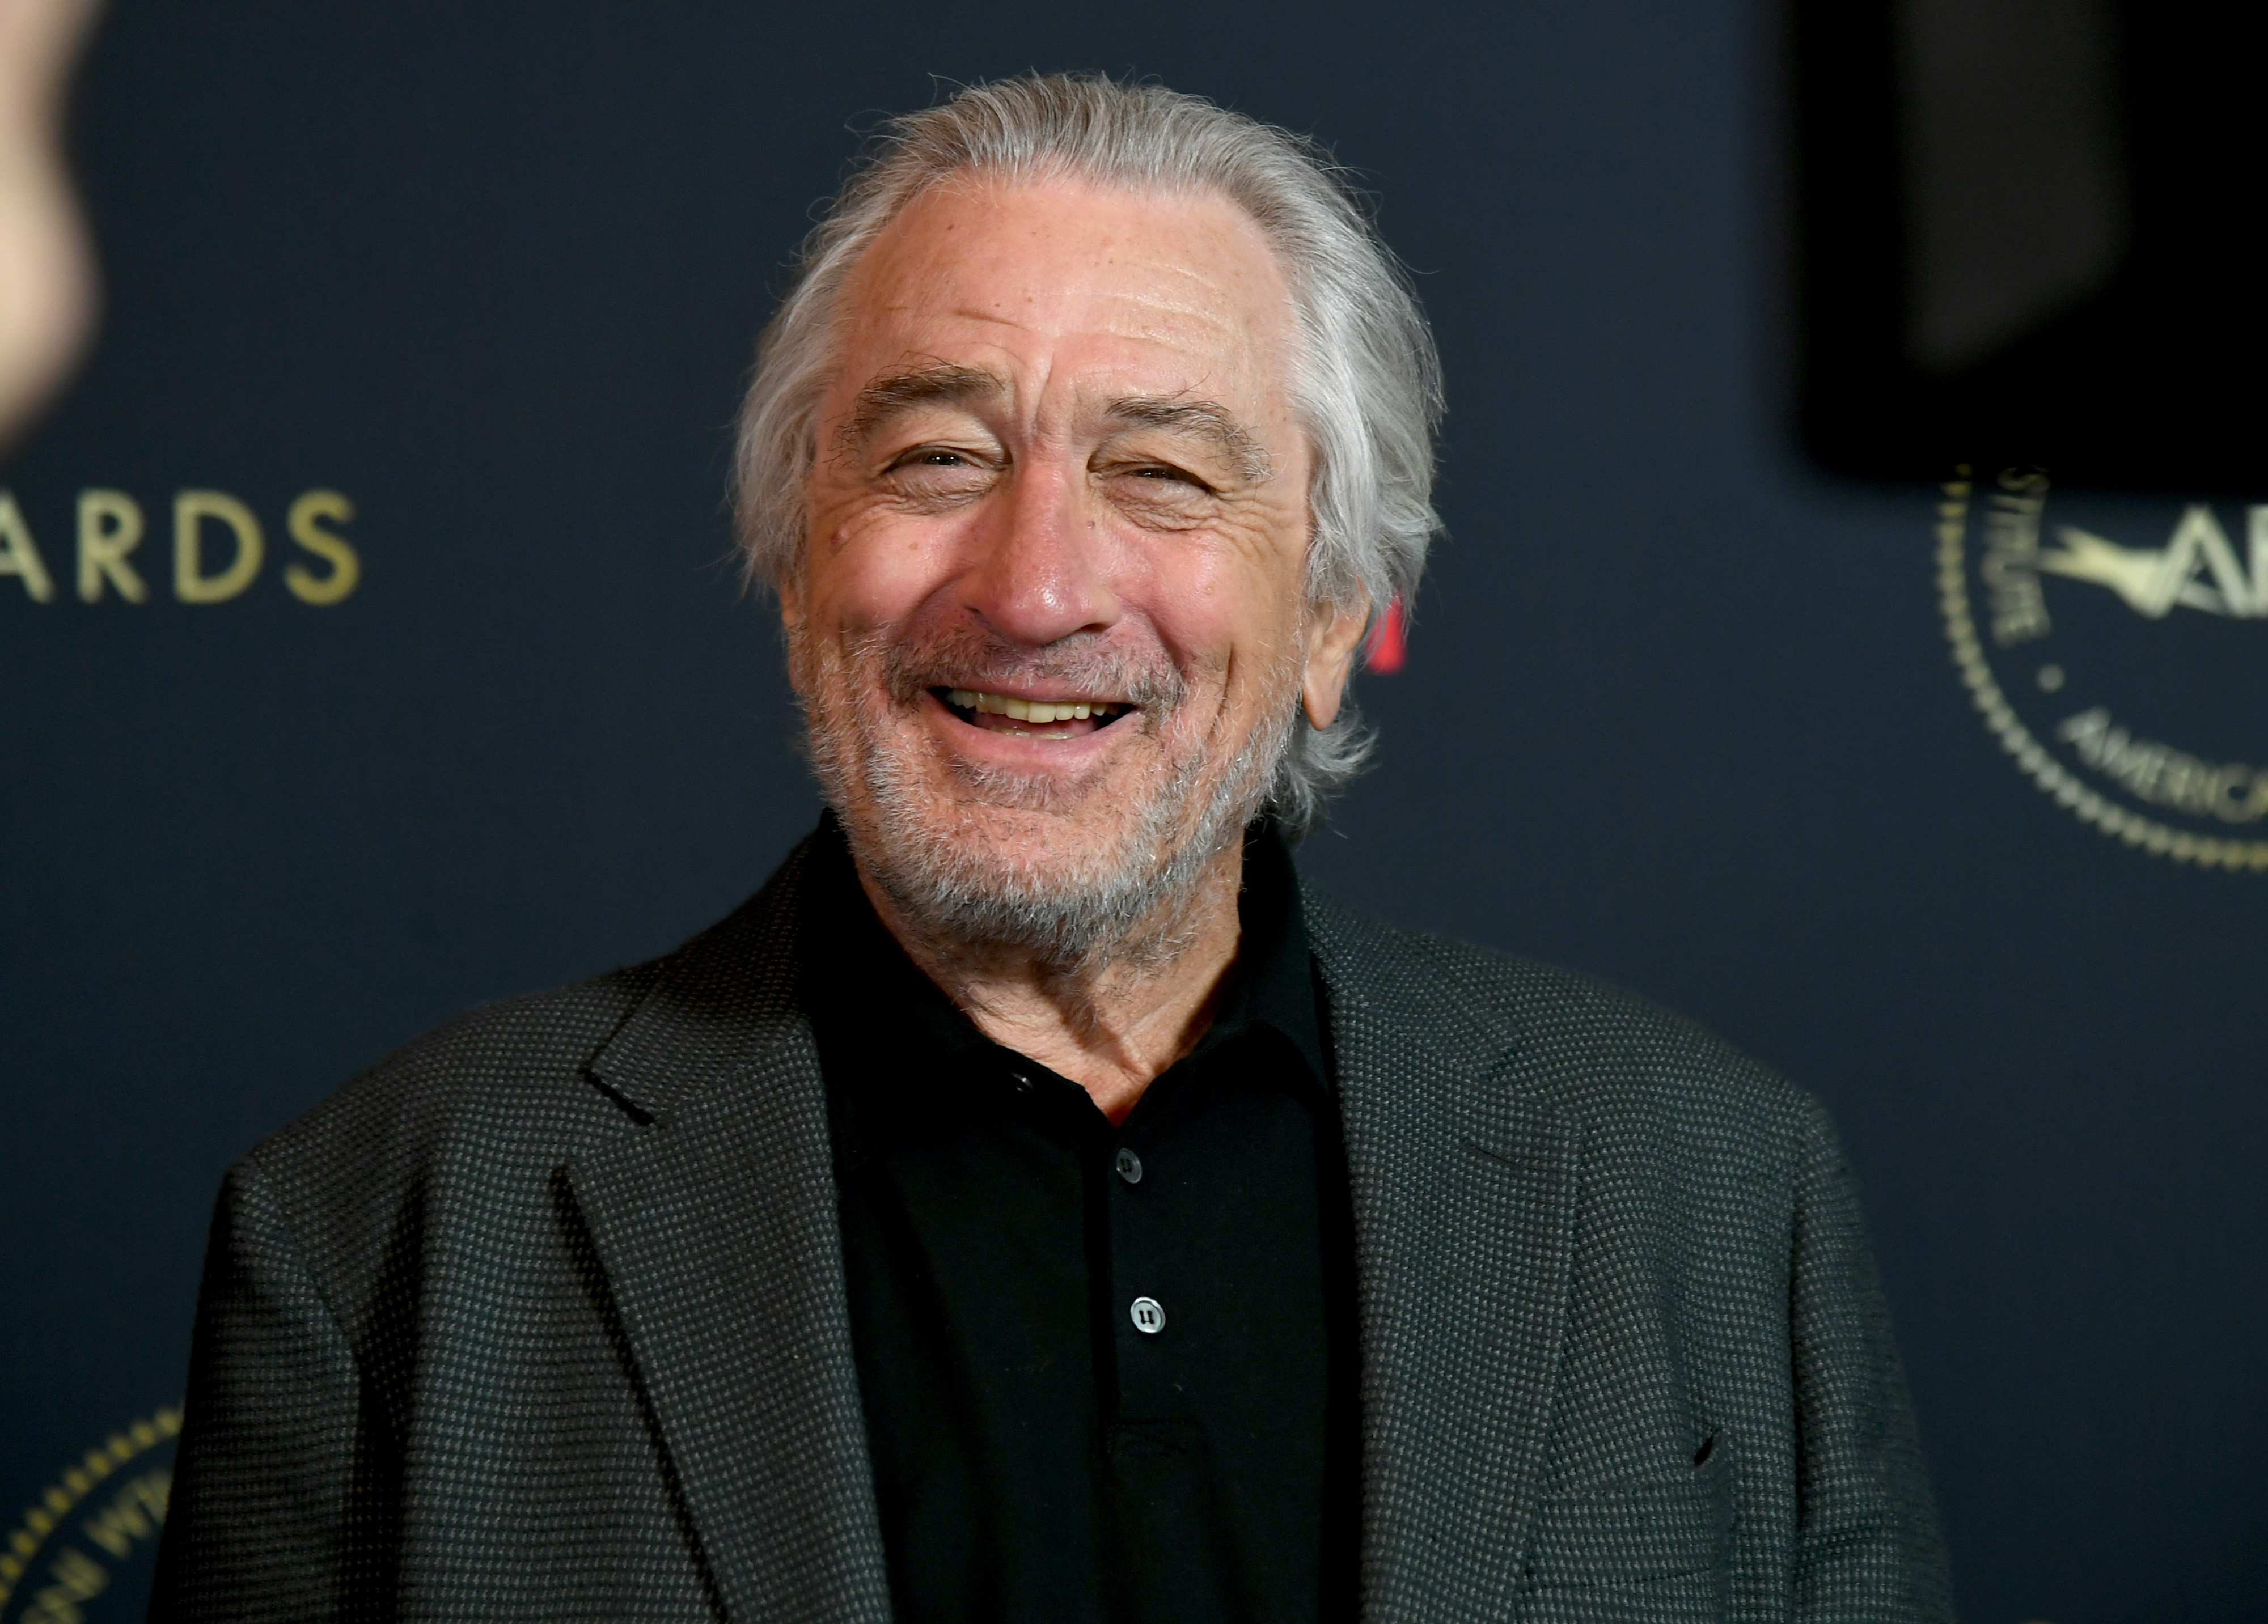 Robert De Niro smiles as he attends the 20th Annual AFI Awards at Four Seasons Hotel Los Angeles on January 3, 2020 in Los Angeles, California. | Source: Getty Images